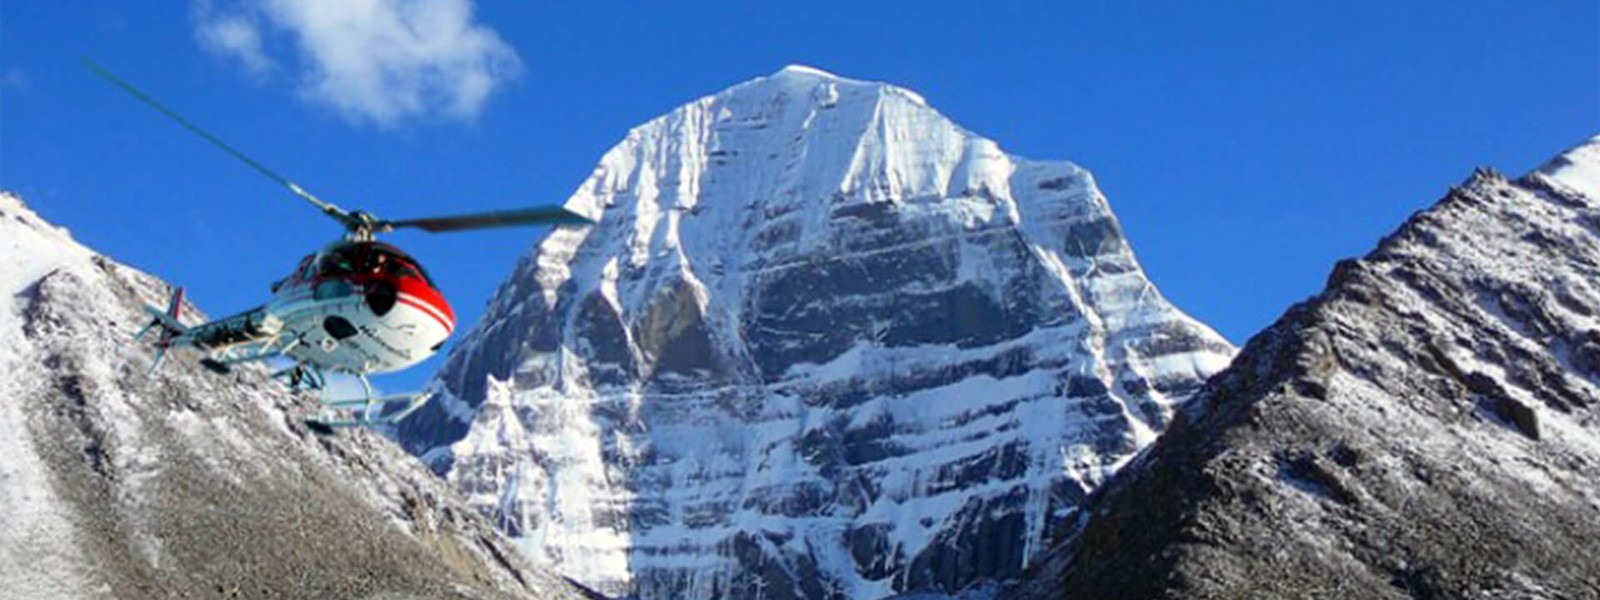 Kailash Heli Tours by Helicopter